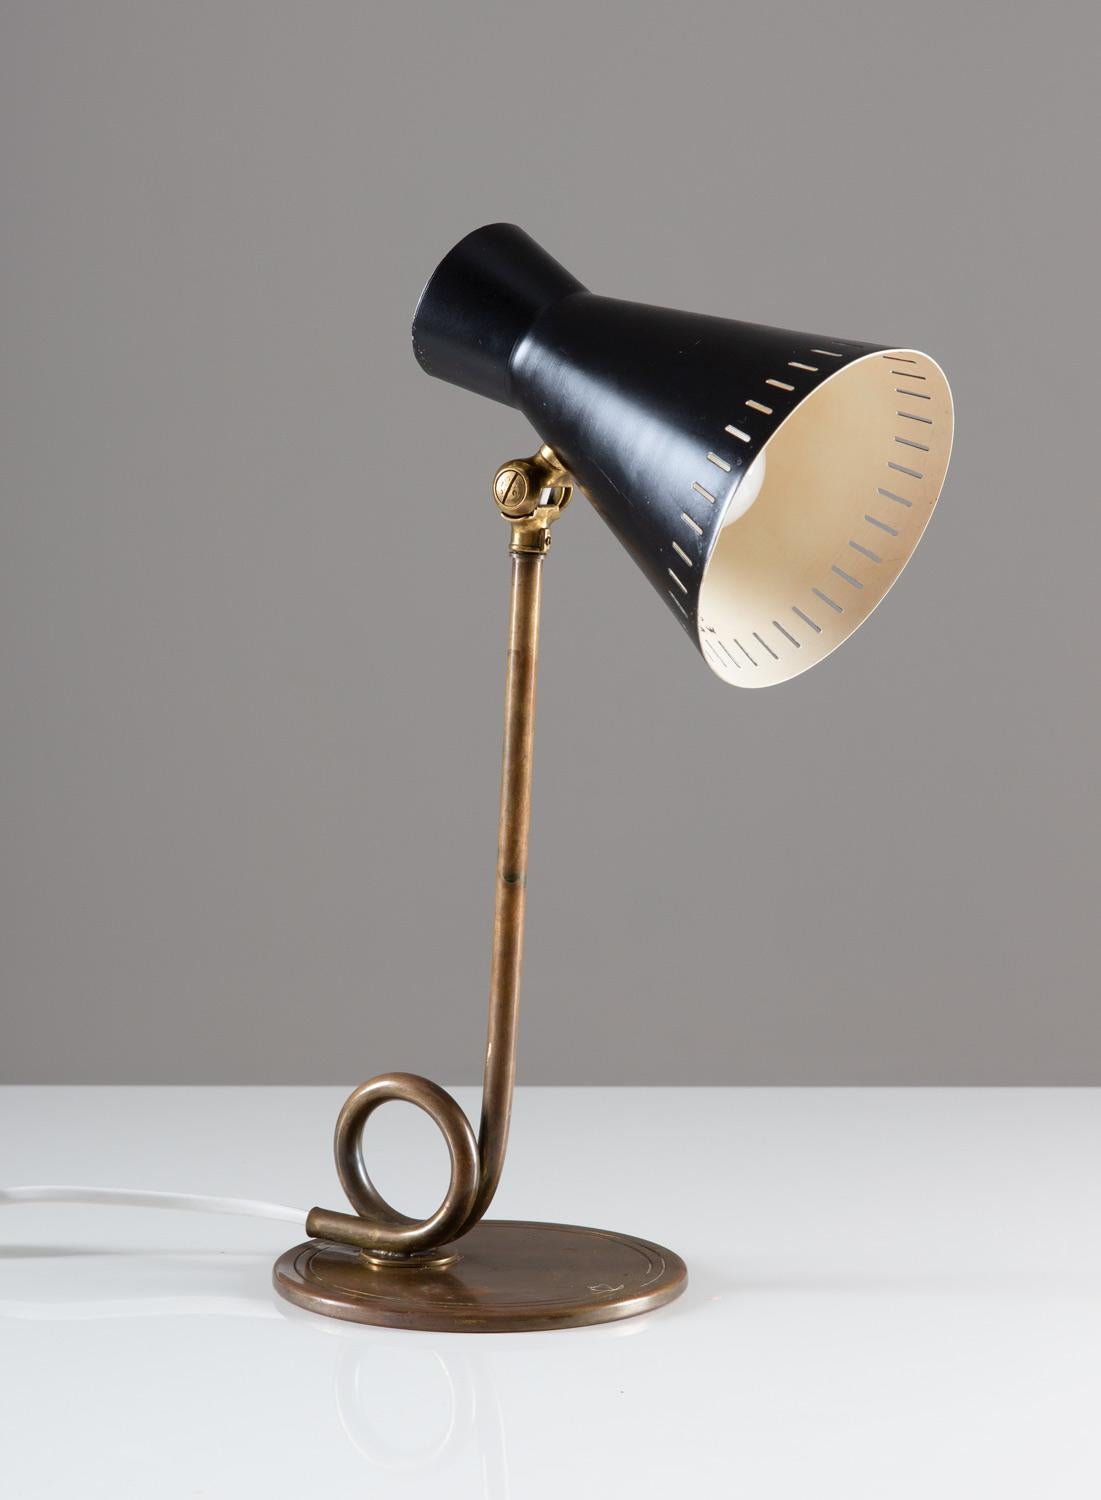 A charming desk lamp in brass produced in Sweden by E.A.E. 
This lamp consist of a brass base with a perforated black metal shade.

Condition: Good original condition with a soft patina and minor dents on the shade.